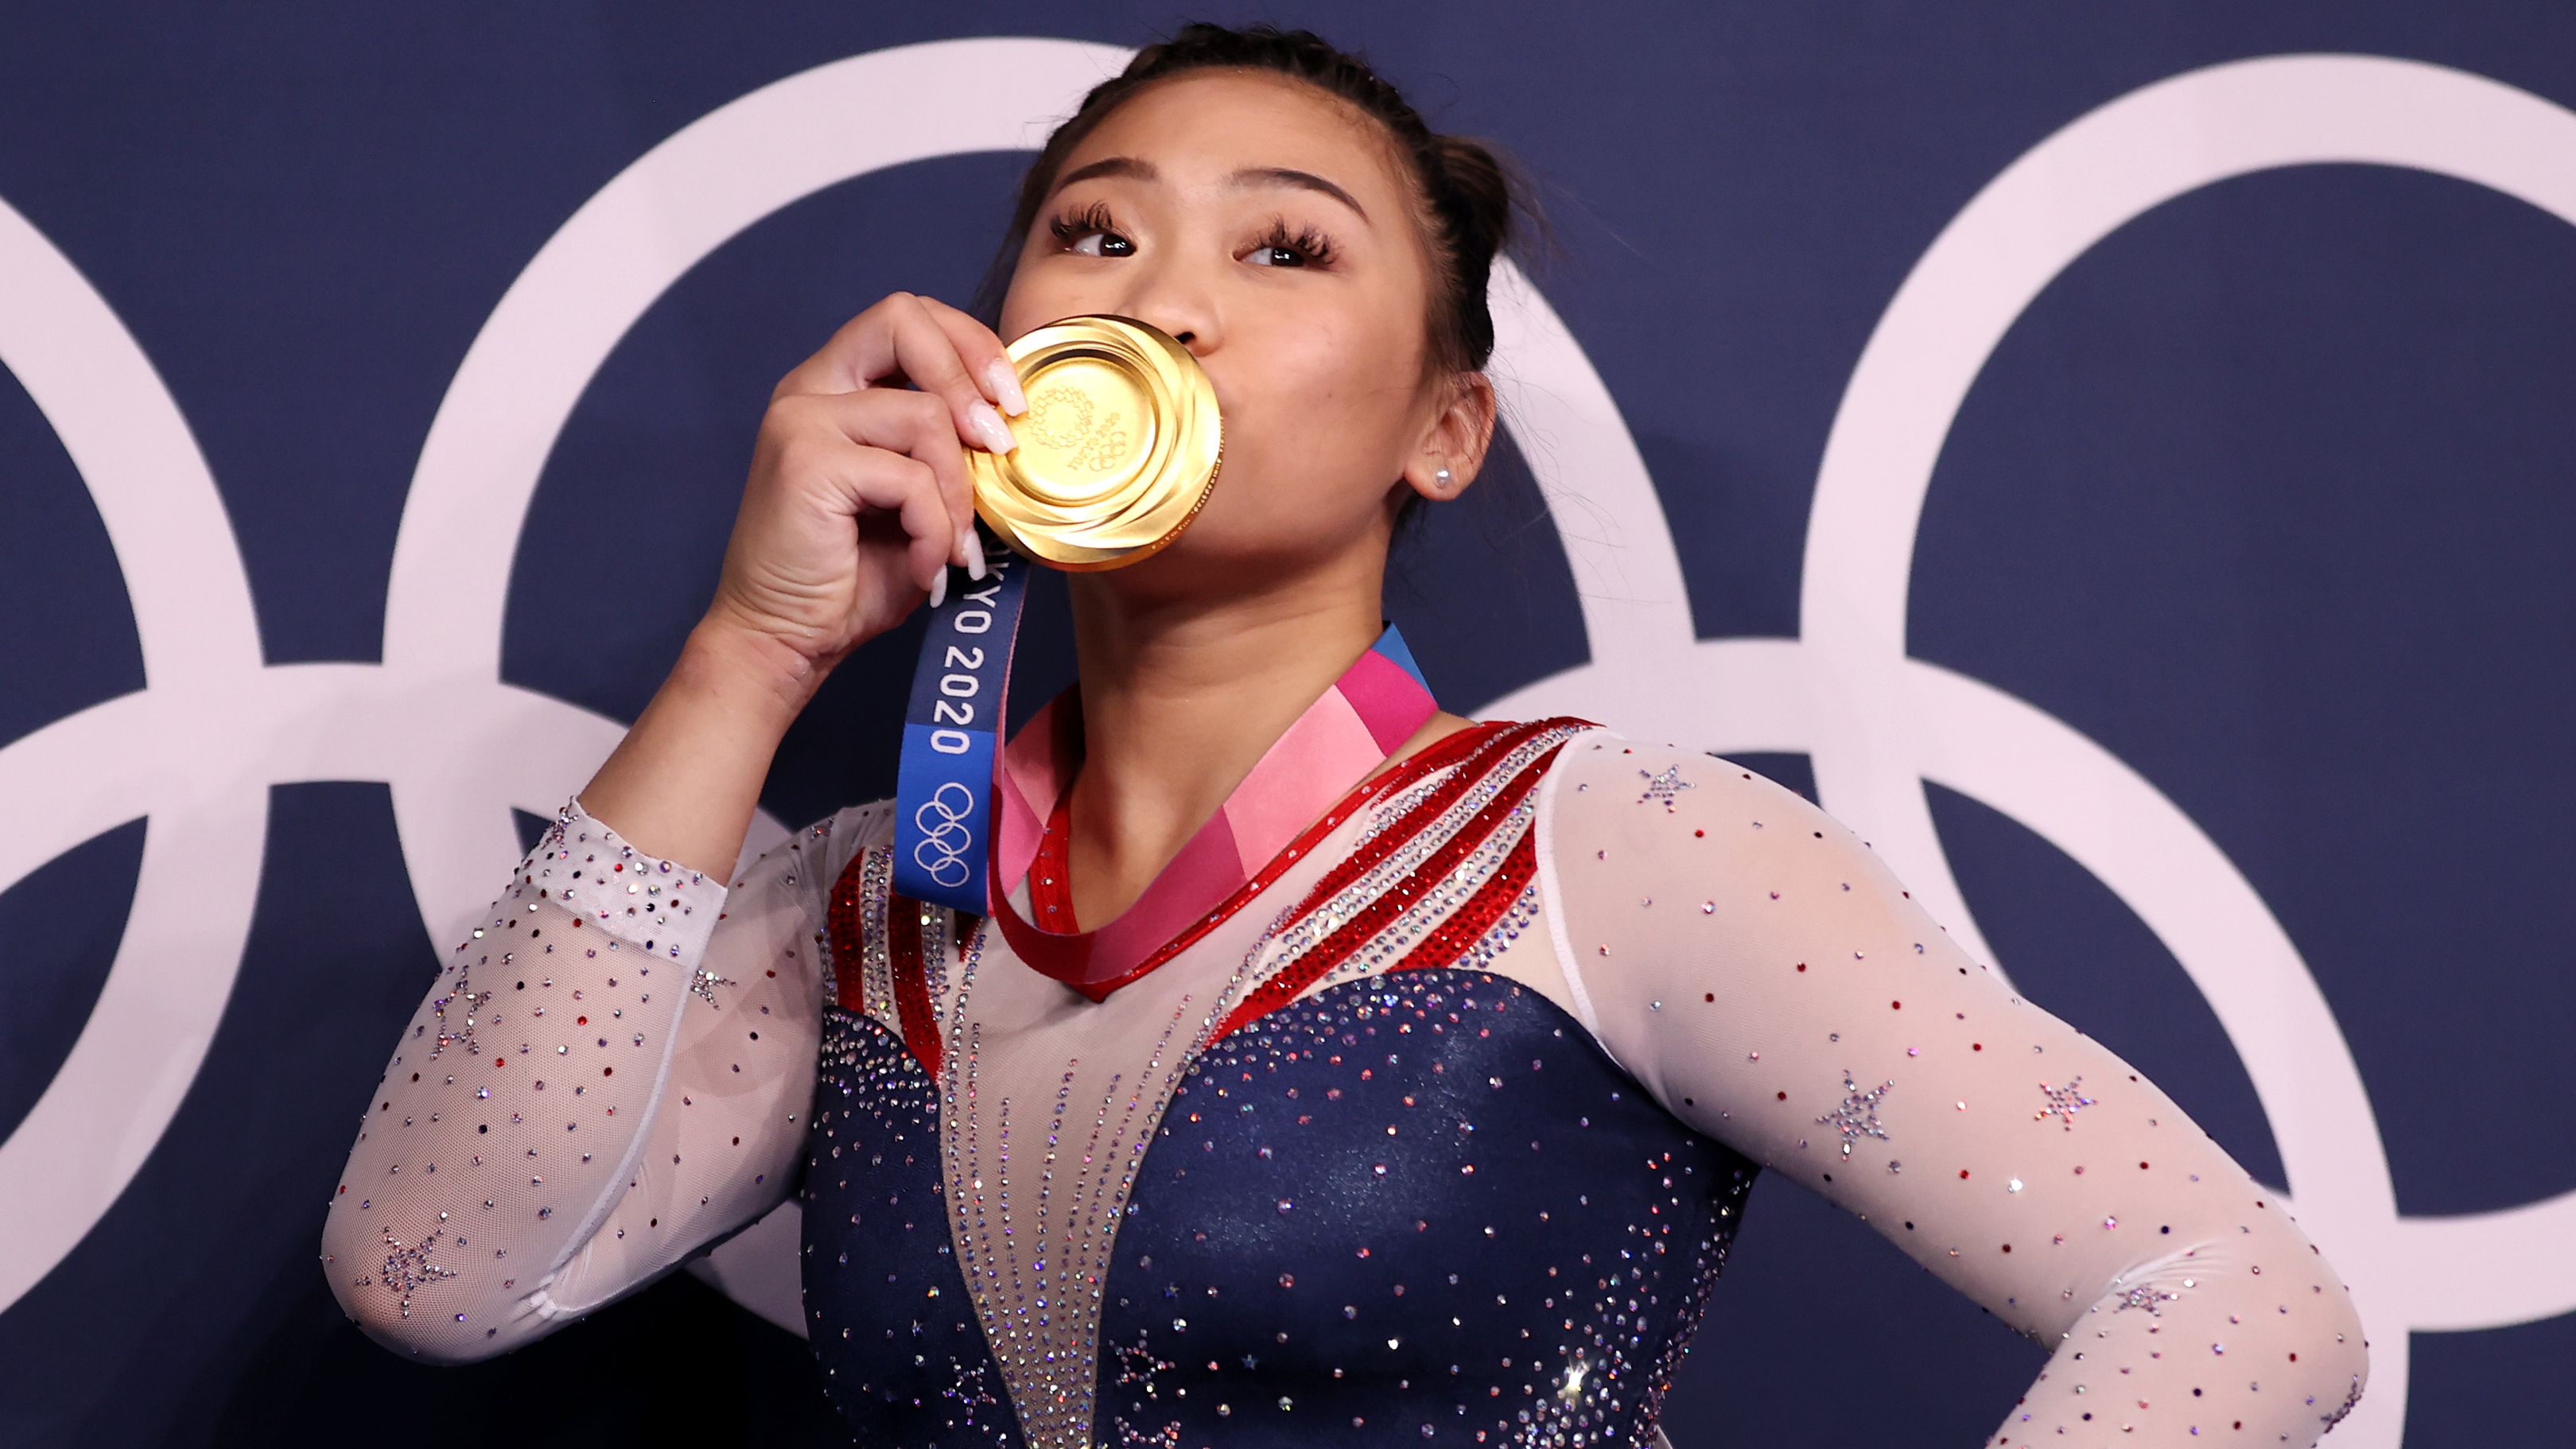 Biles watches on as US teammate claims gold